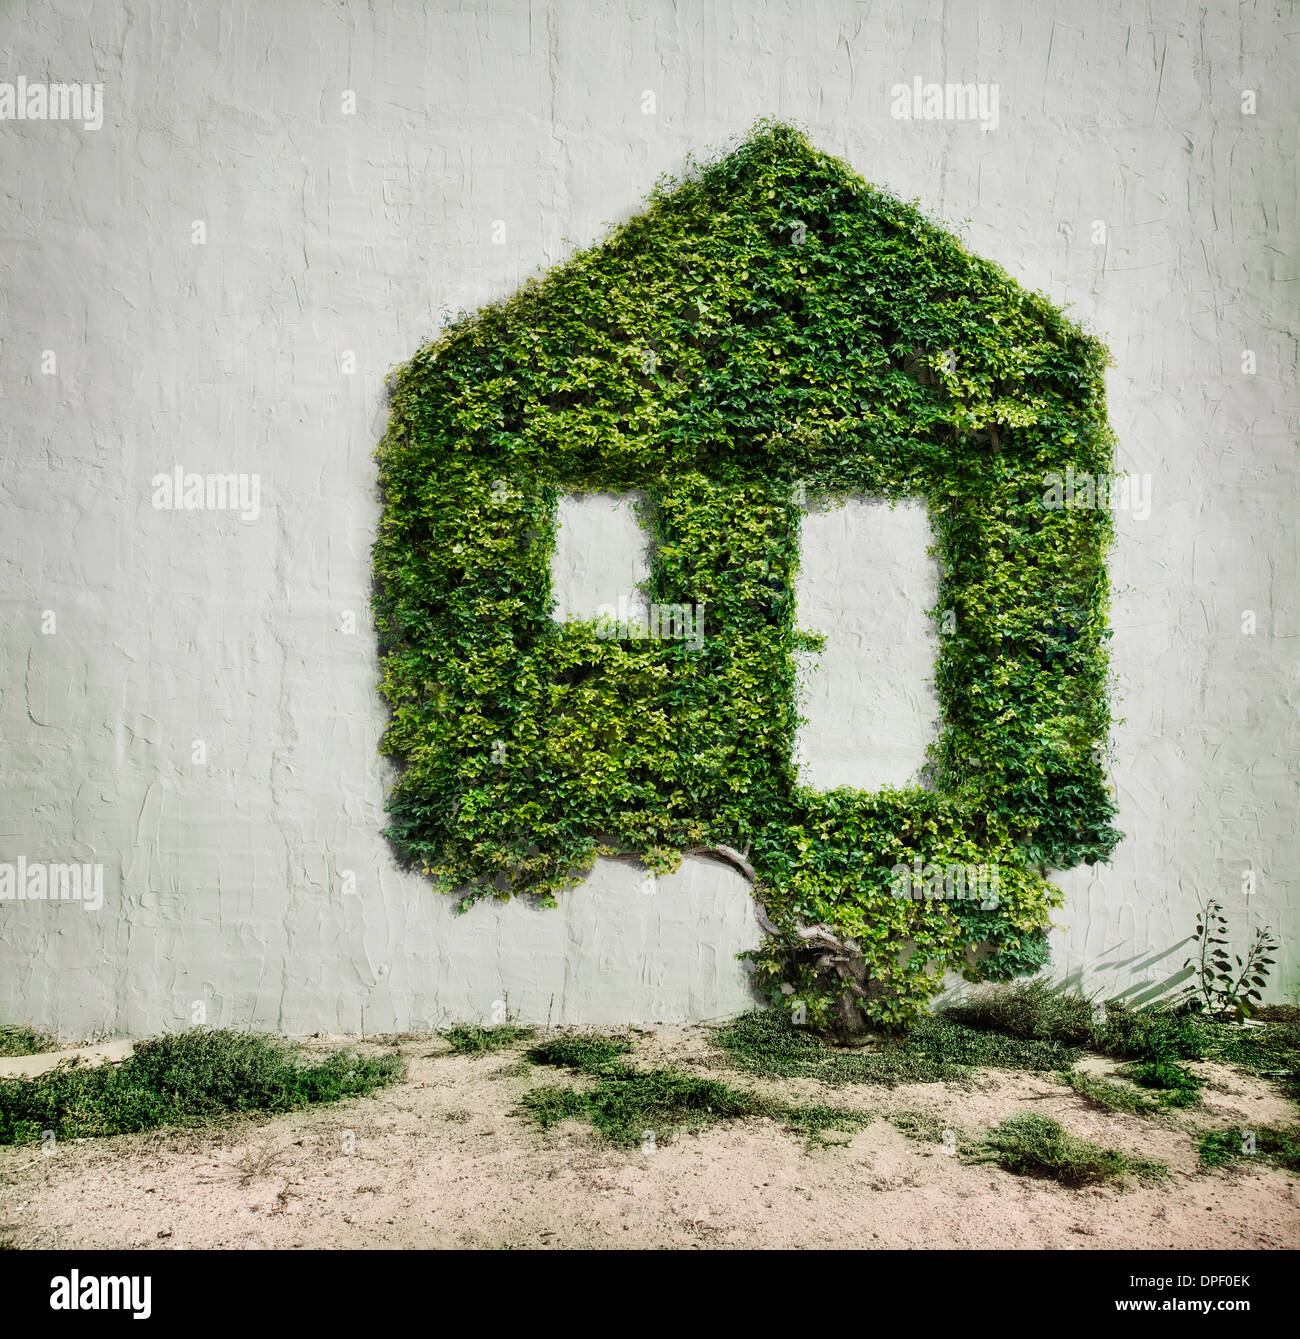 Ivy growing in shape of house Stock Photo